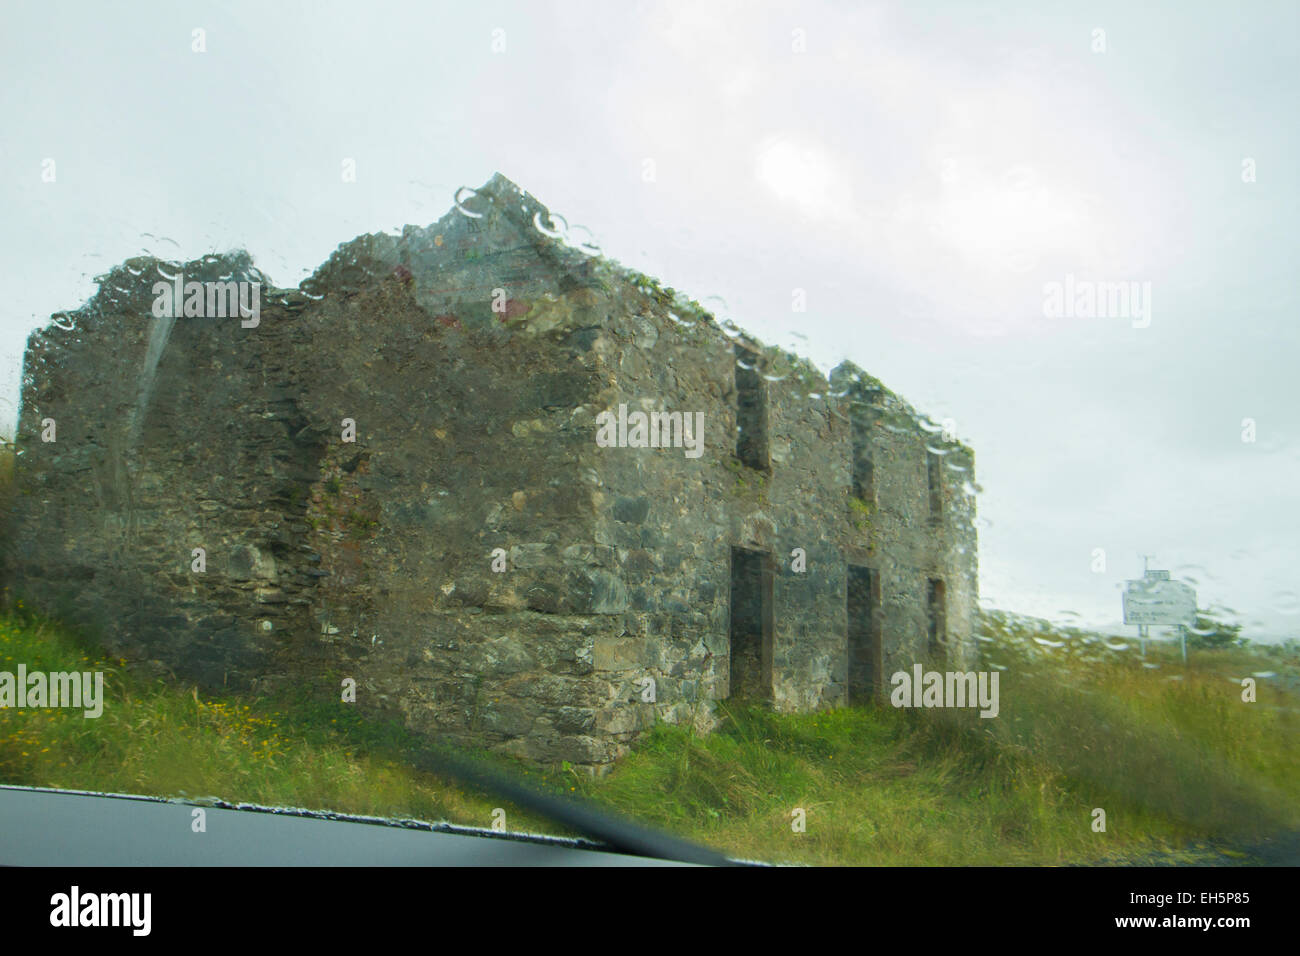 View through rainy window of car (with the window wipers in motion) of an old dilapidated stone cottage in Ireland Stock Photo